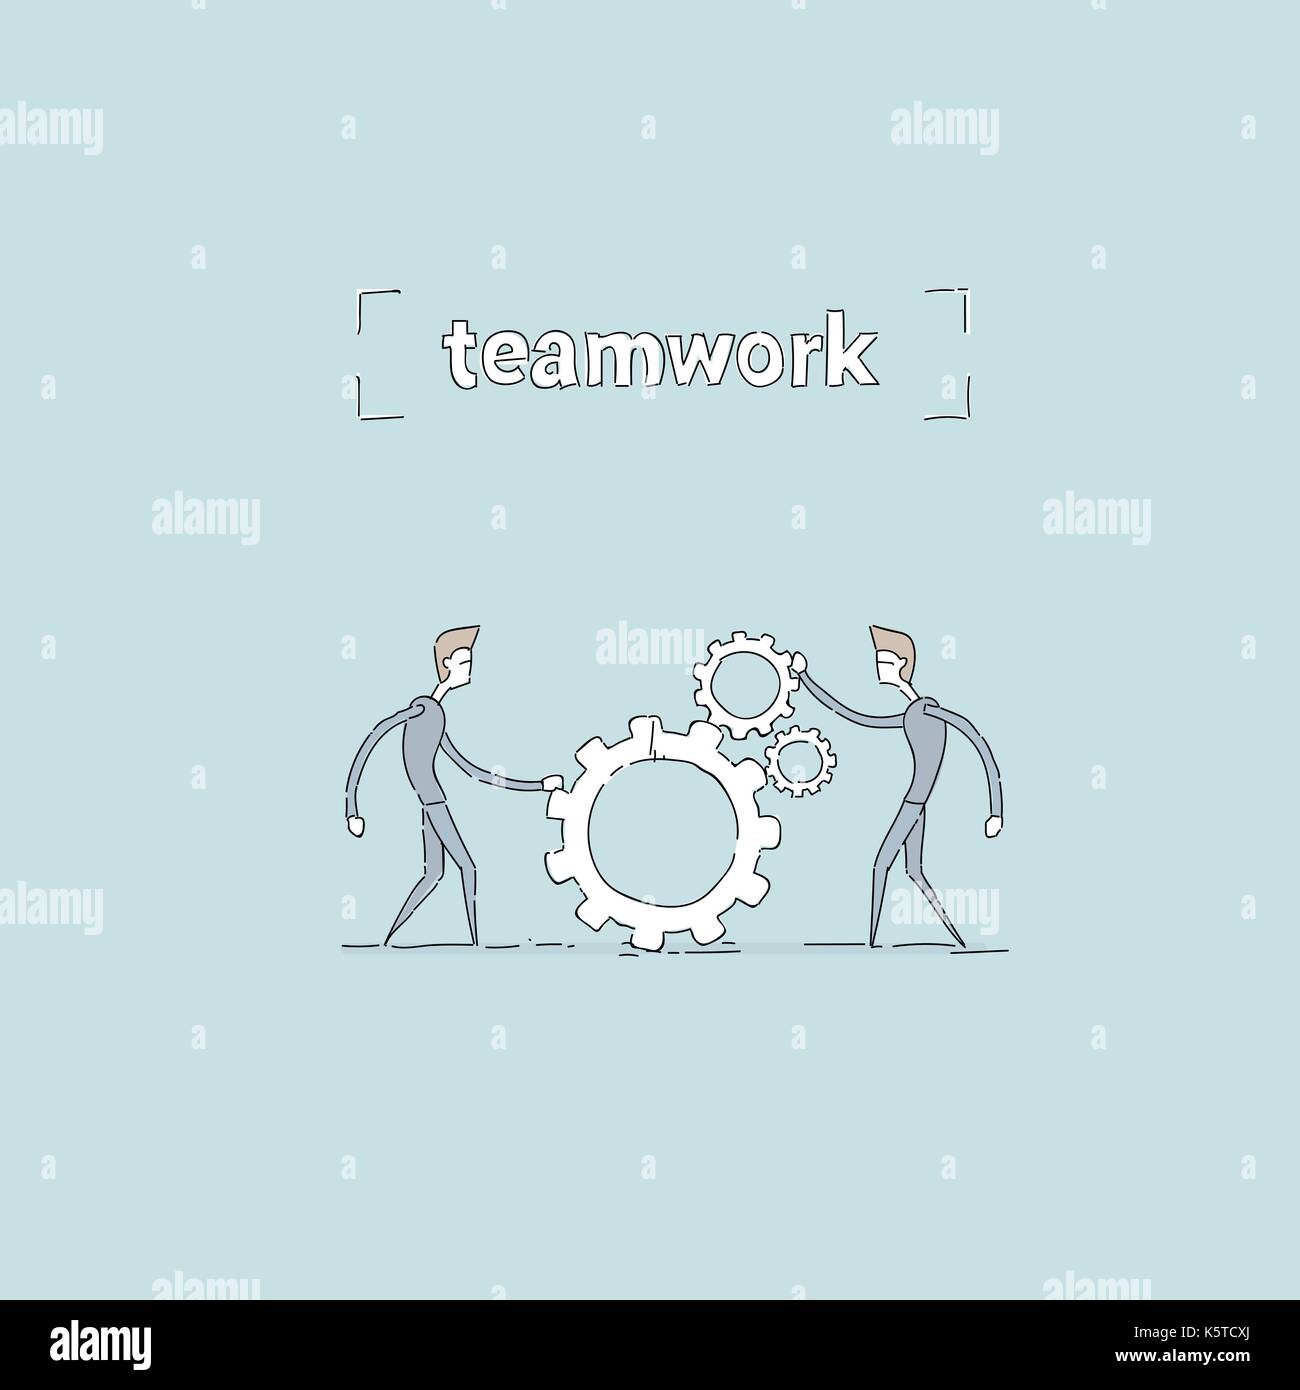 Two Businessman Holding Cog Wheel Teamwork Cooperation Concept Stock Vector